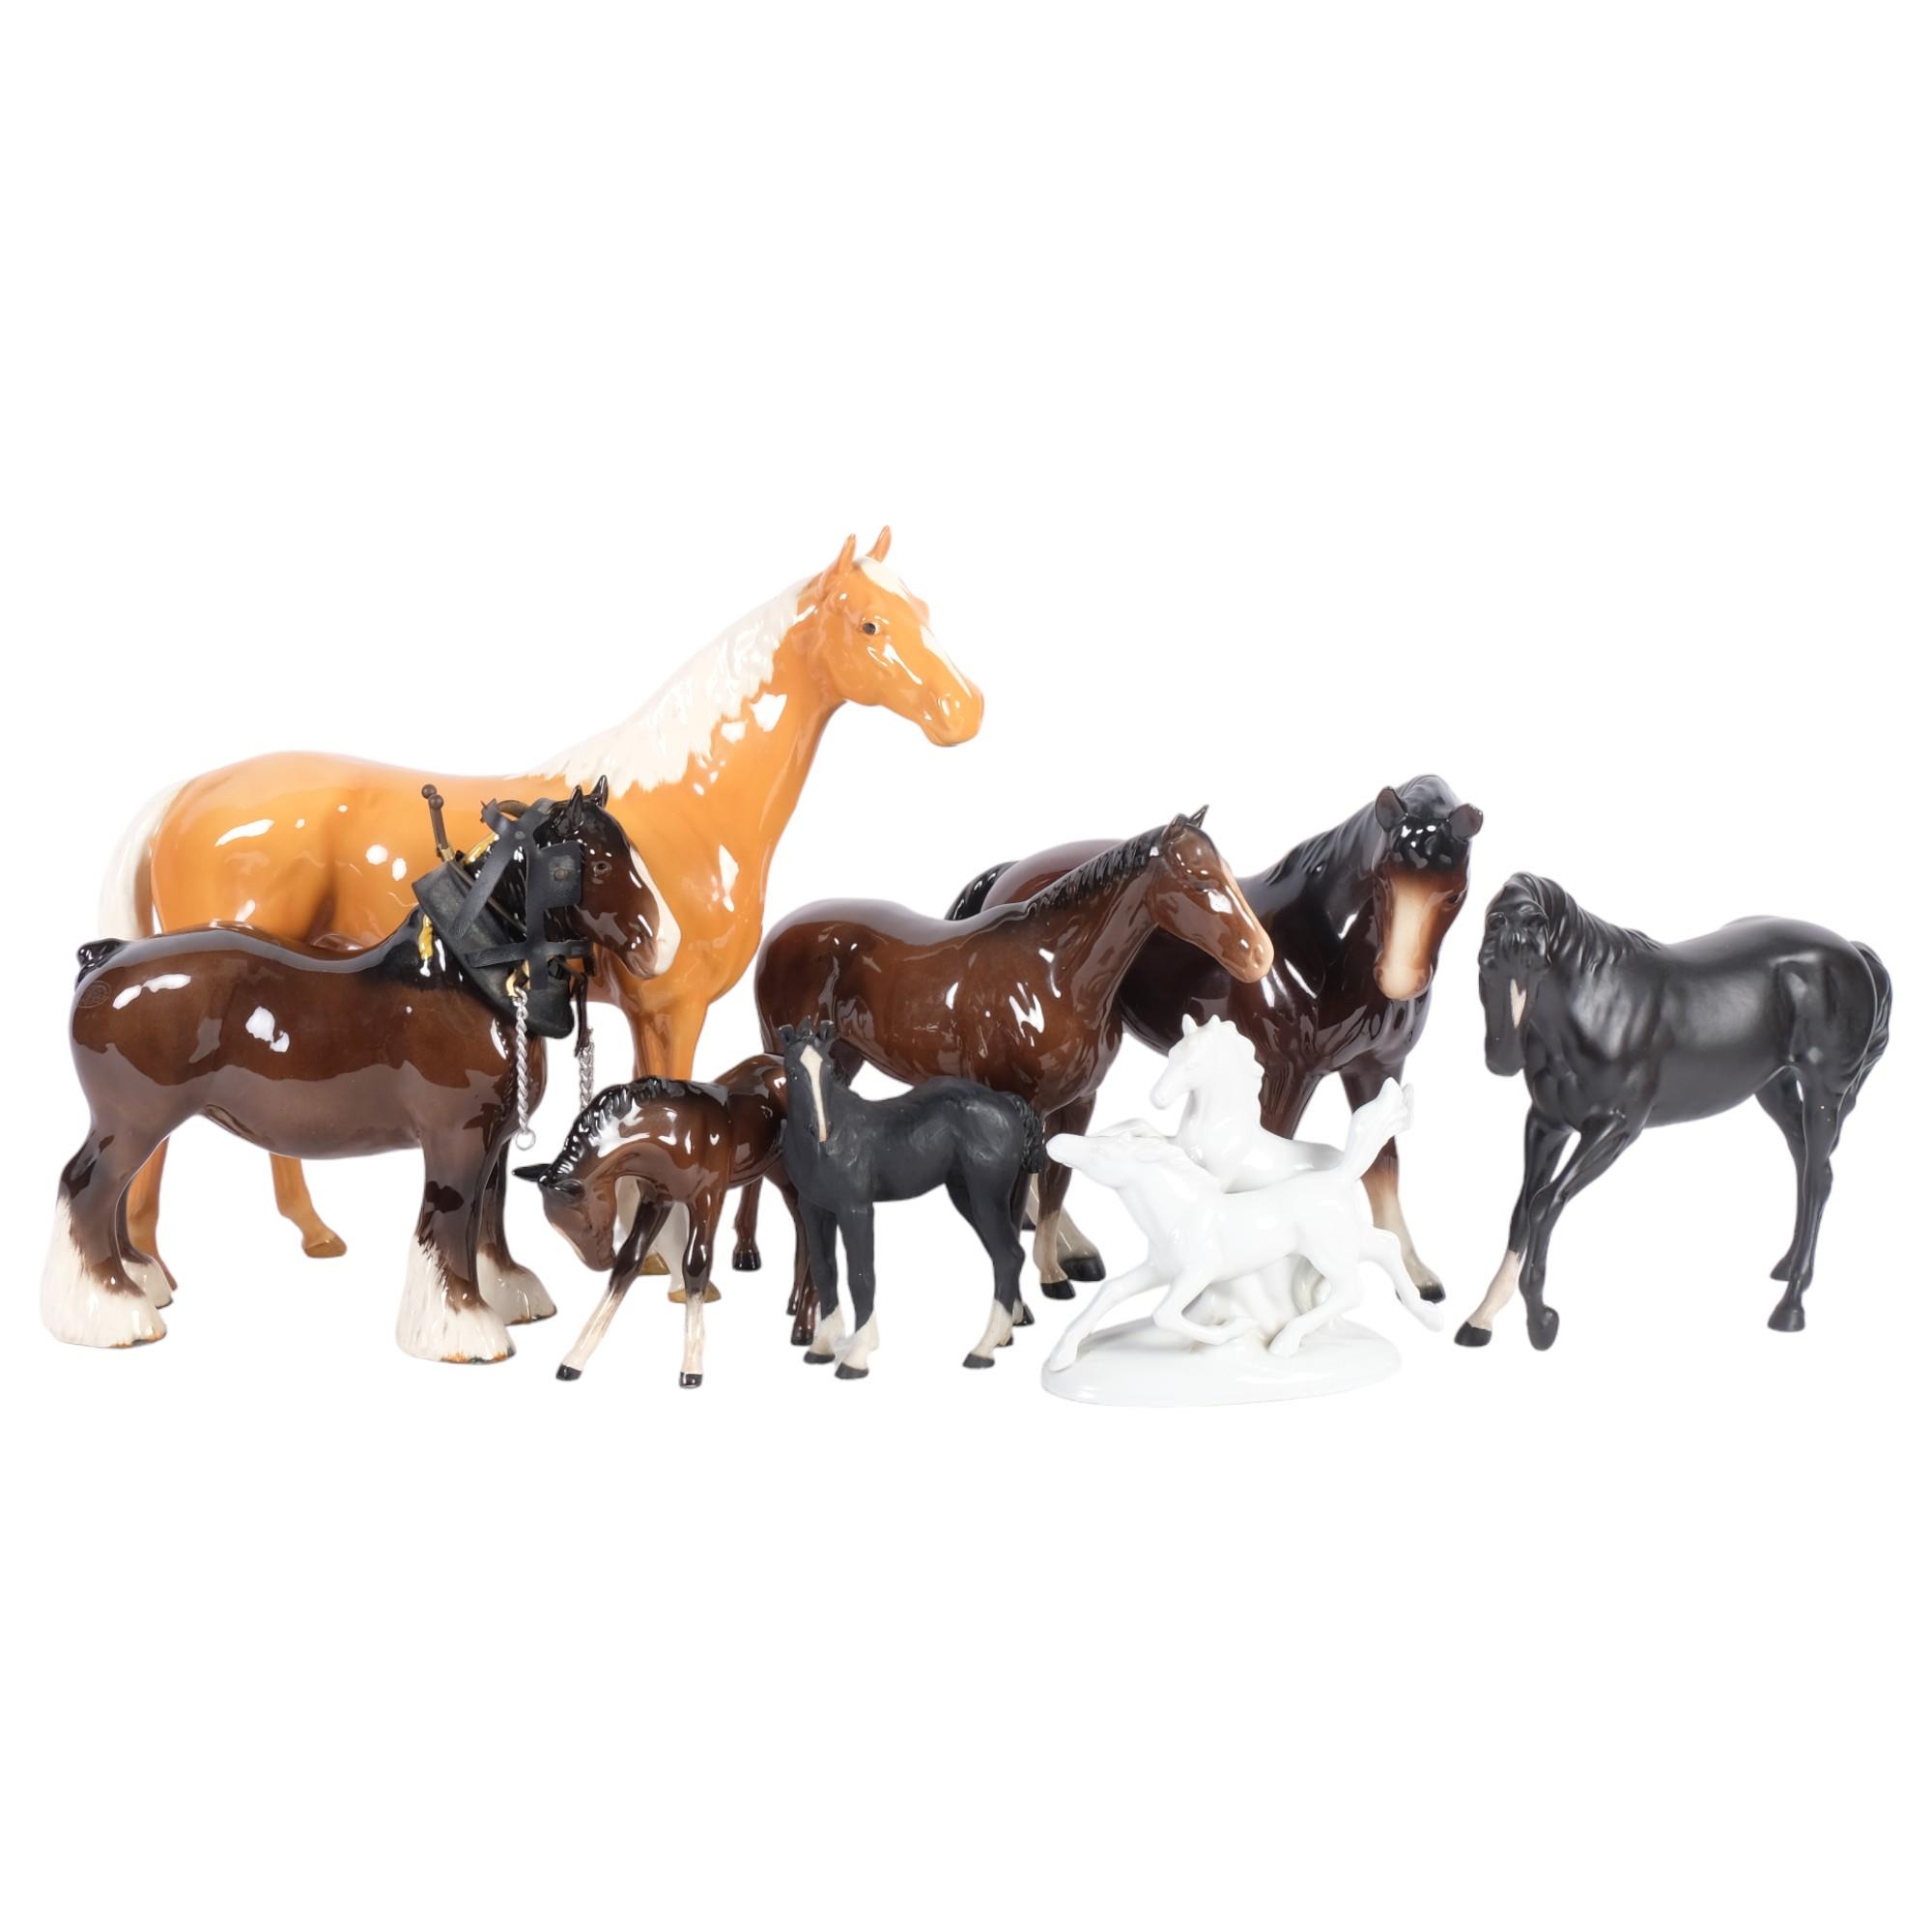 Beswick Shire horse, and a Beswick Palomino, H30cm (front leg glued), and other horse figures